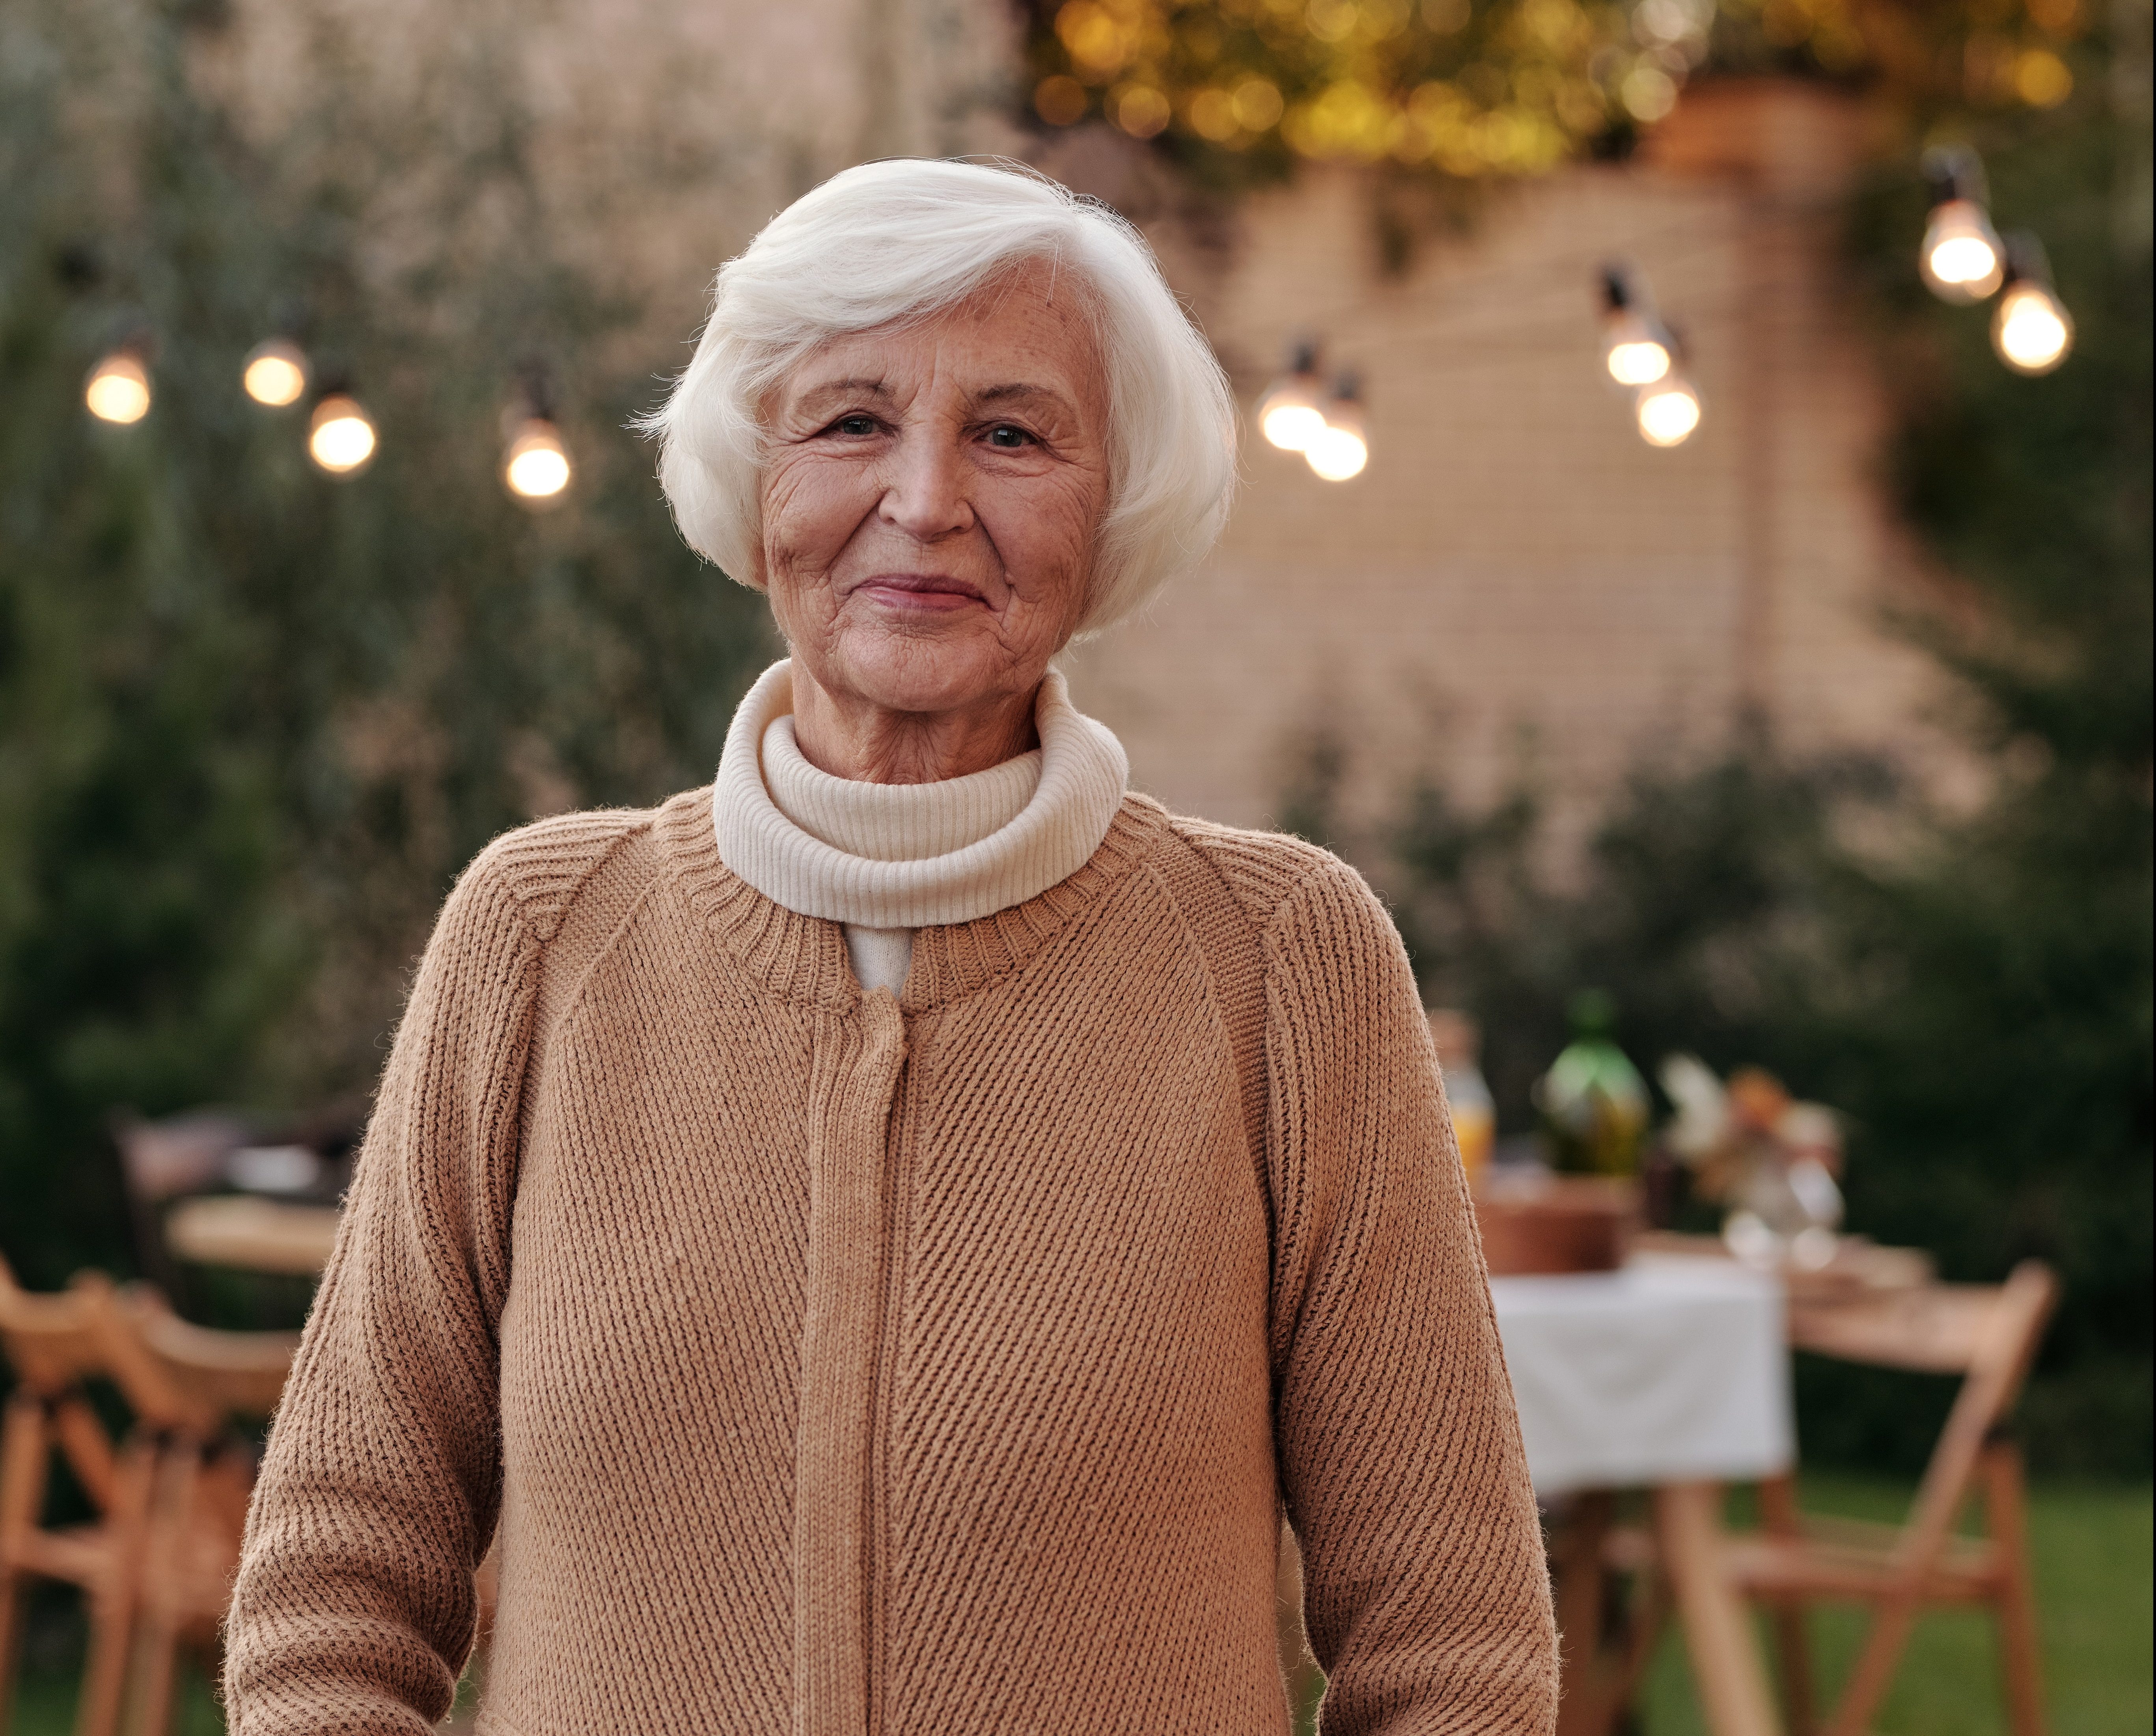 Elderly woman with white hair standing in front of an outdoor picnic table with fair lights smiling at the camera